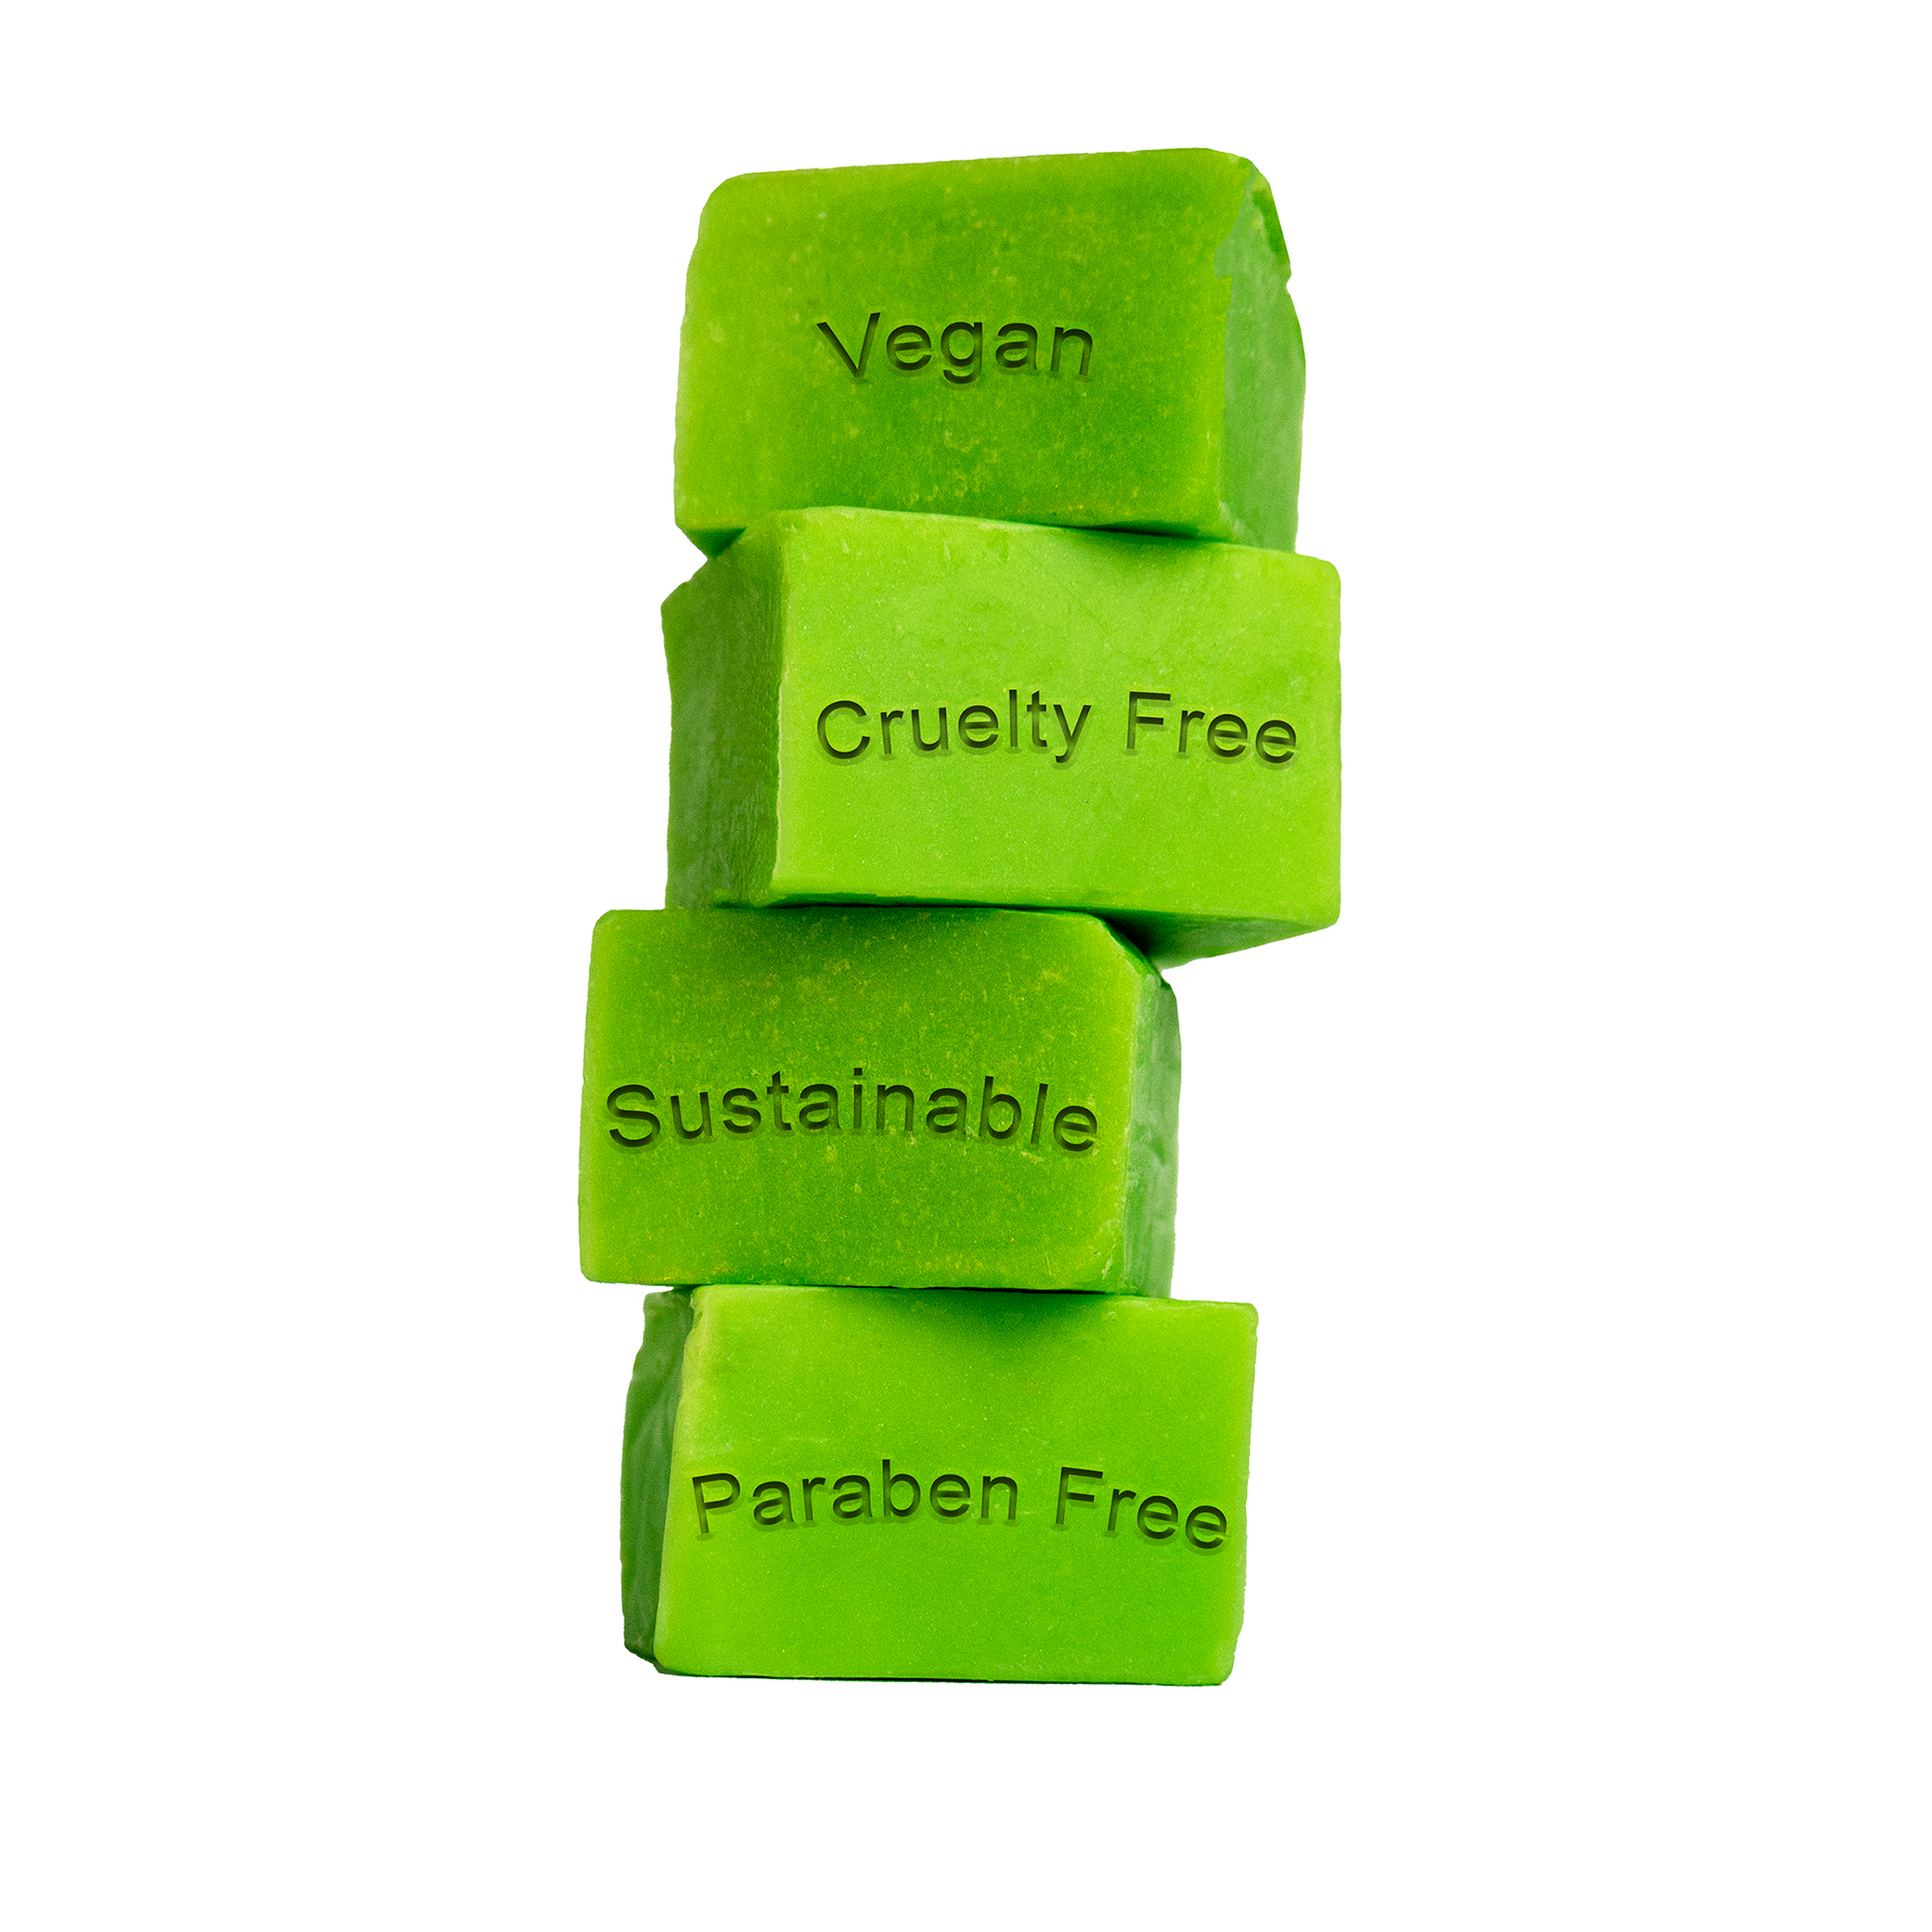 Stacked green soap dough cubes with the words "vegan, cruelty-free, sustainable, and paraben free" carved into soap dough cubes.